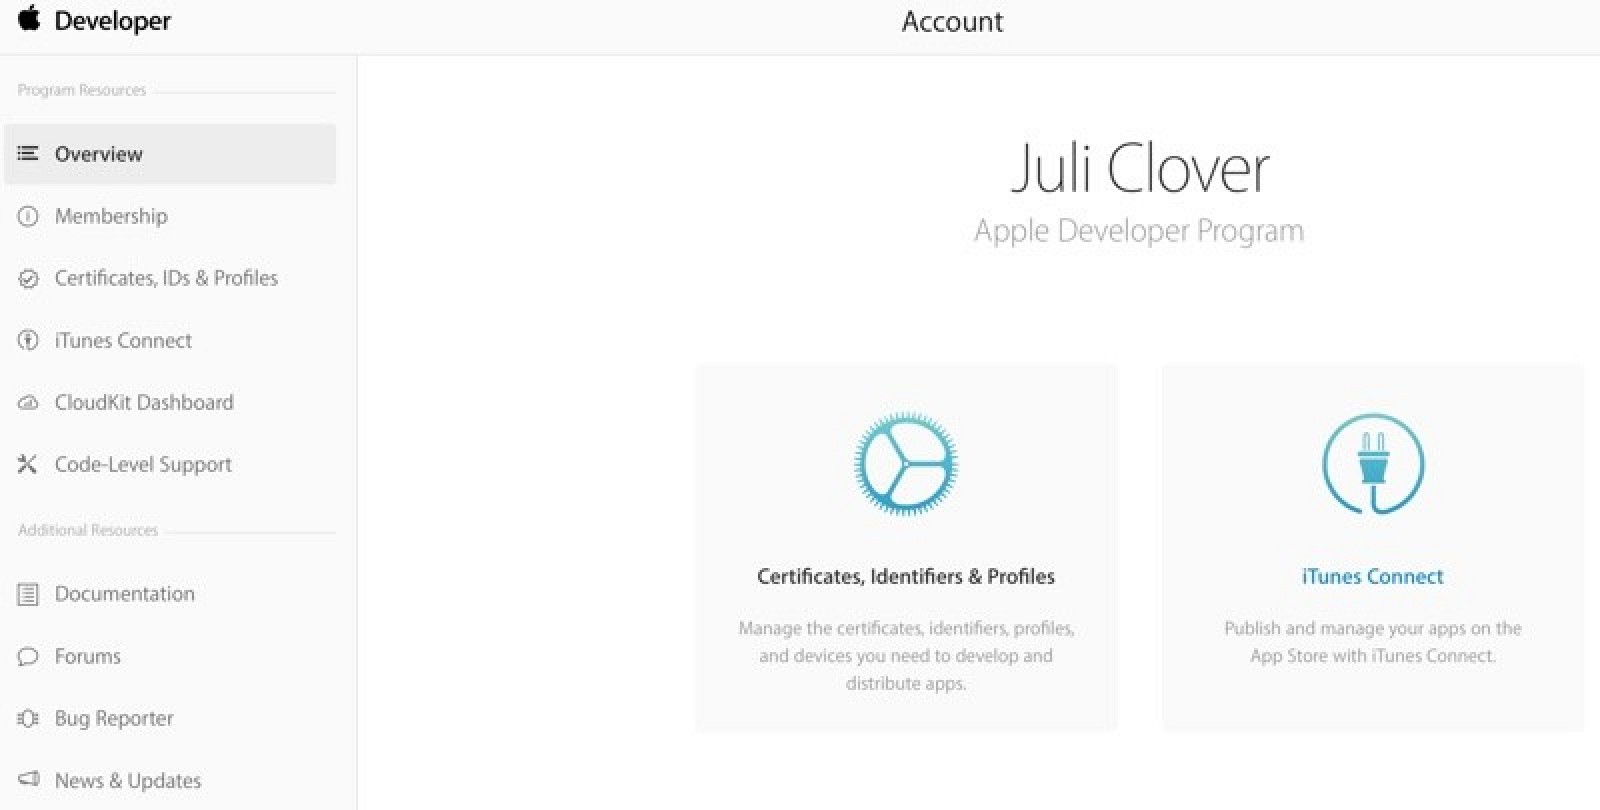 Apple's Developer Center Gets New Account Page With